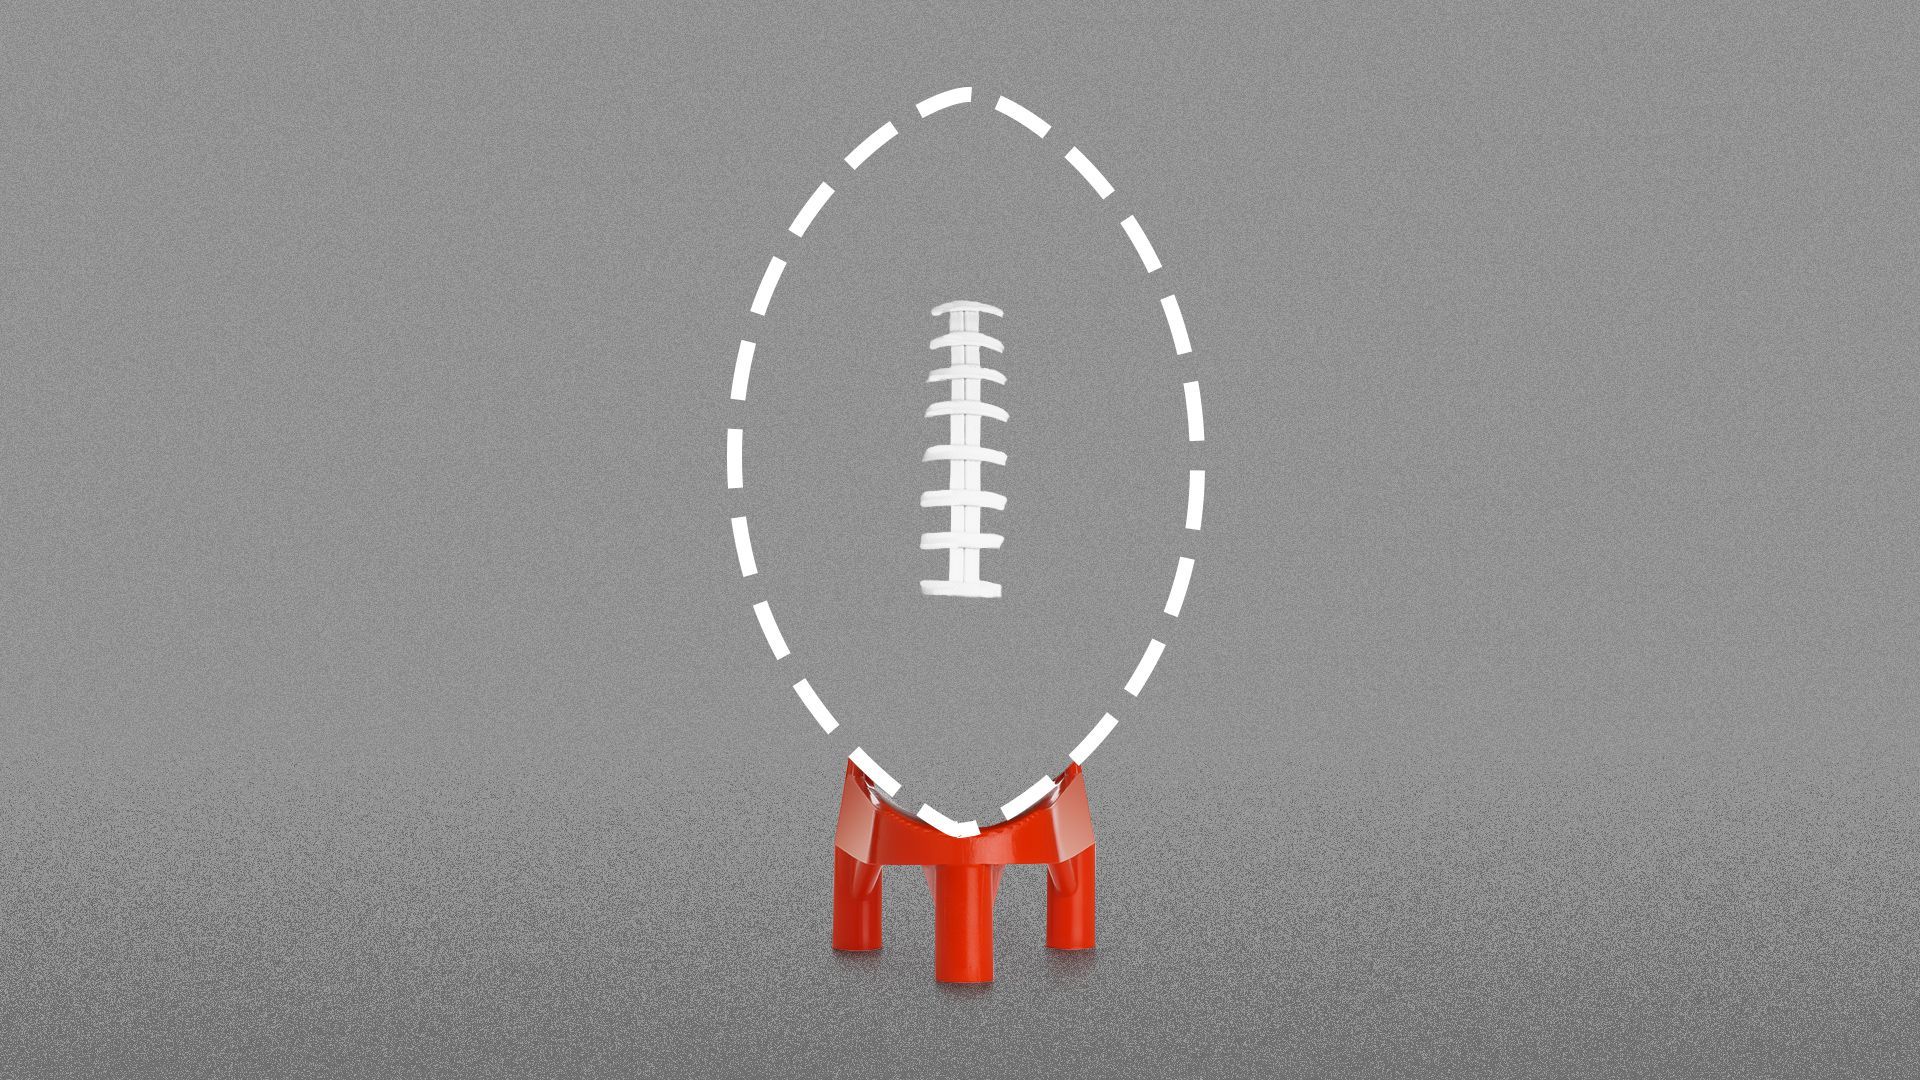 Illustration of an outline of a football on a kickoff stand.